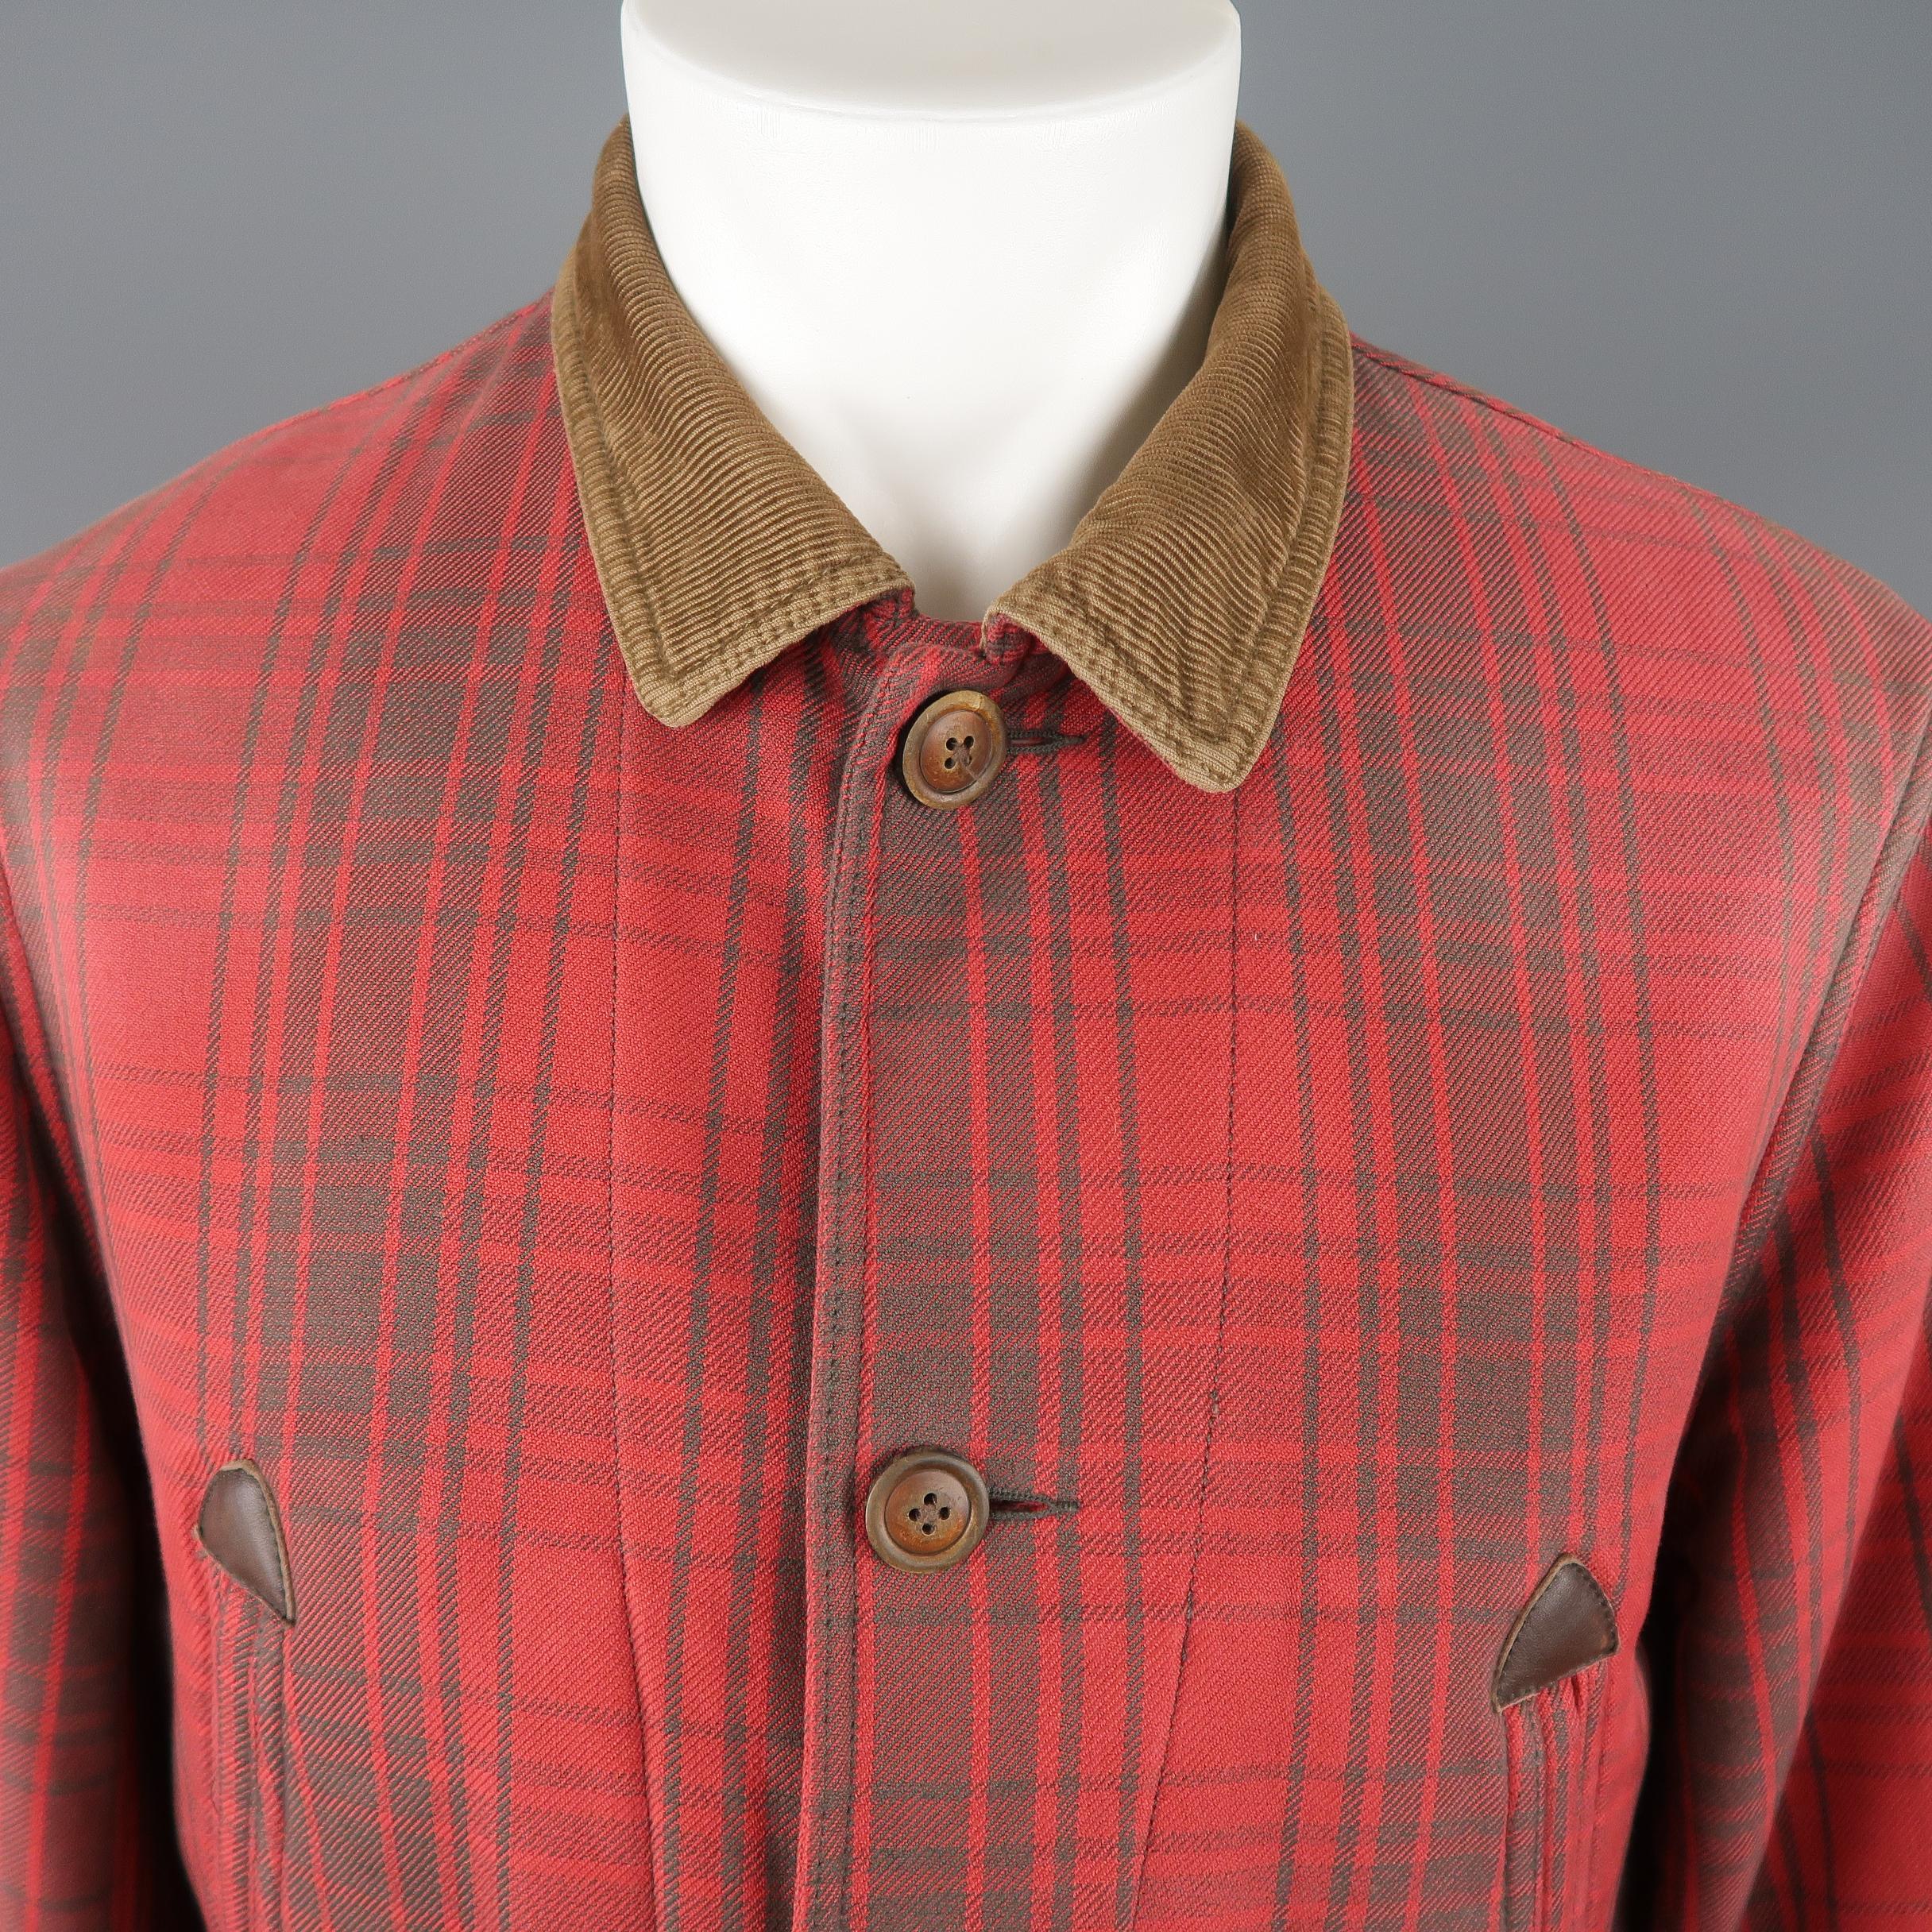 RRL by RALPH LAUREN chore jacket comes in red and brown washed effect plaid cotton twill with a button up closure, double slanted, leather detailed pockets, patch flap pockets, and brown corduroy pointed collar.
 
Excellent Pre-Owned